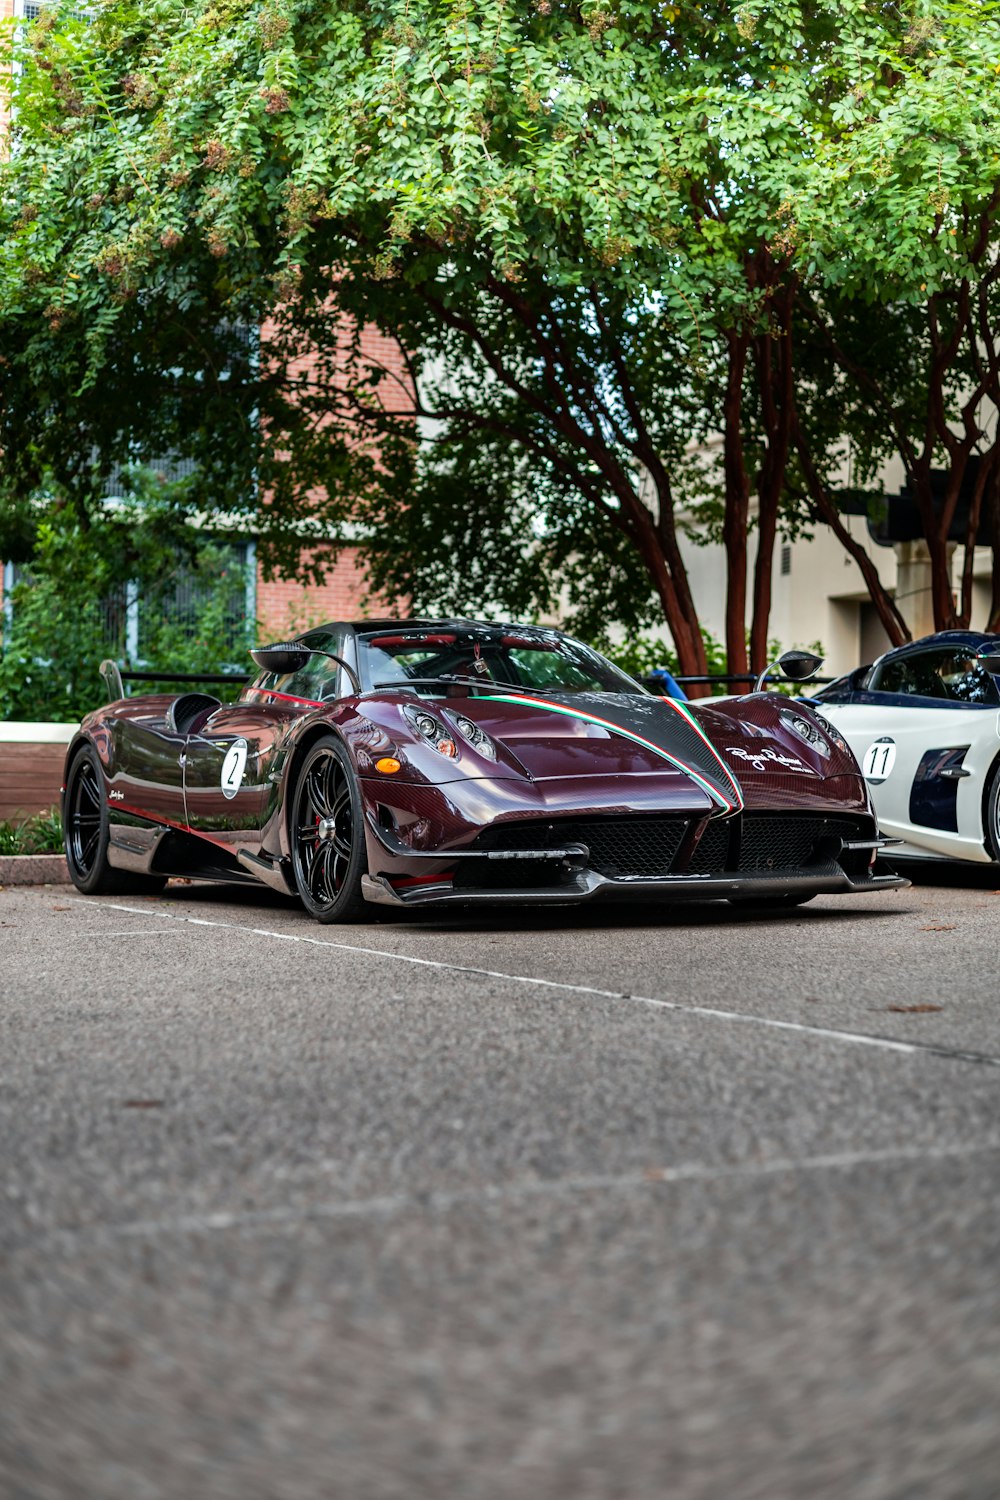 two exotic sports cars parked in a parking lot